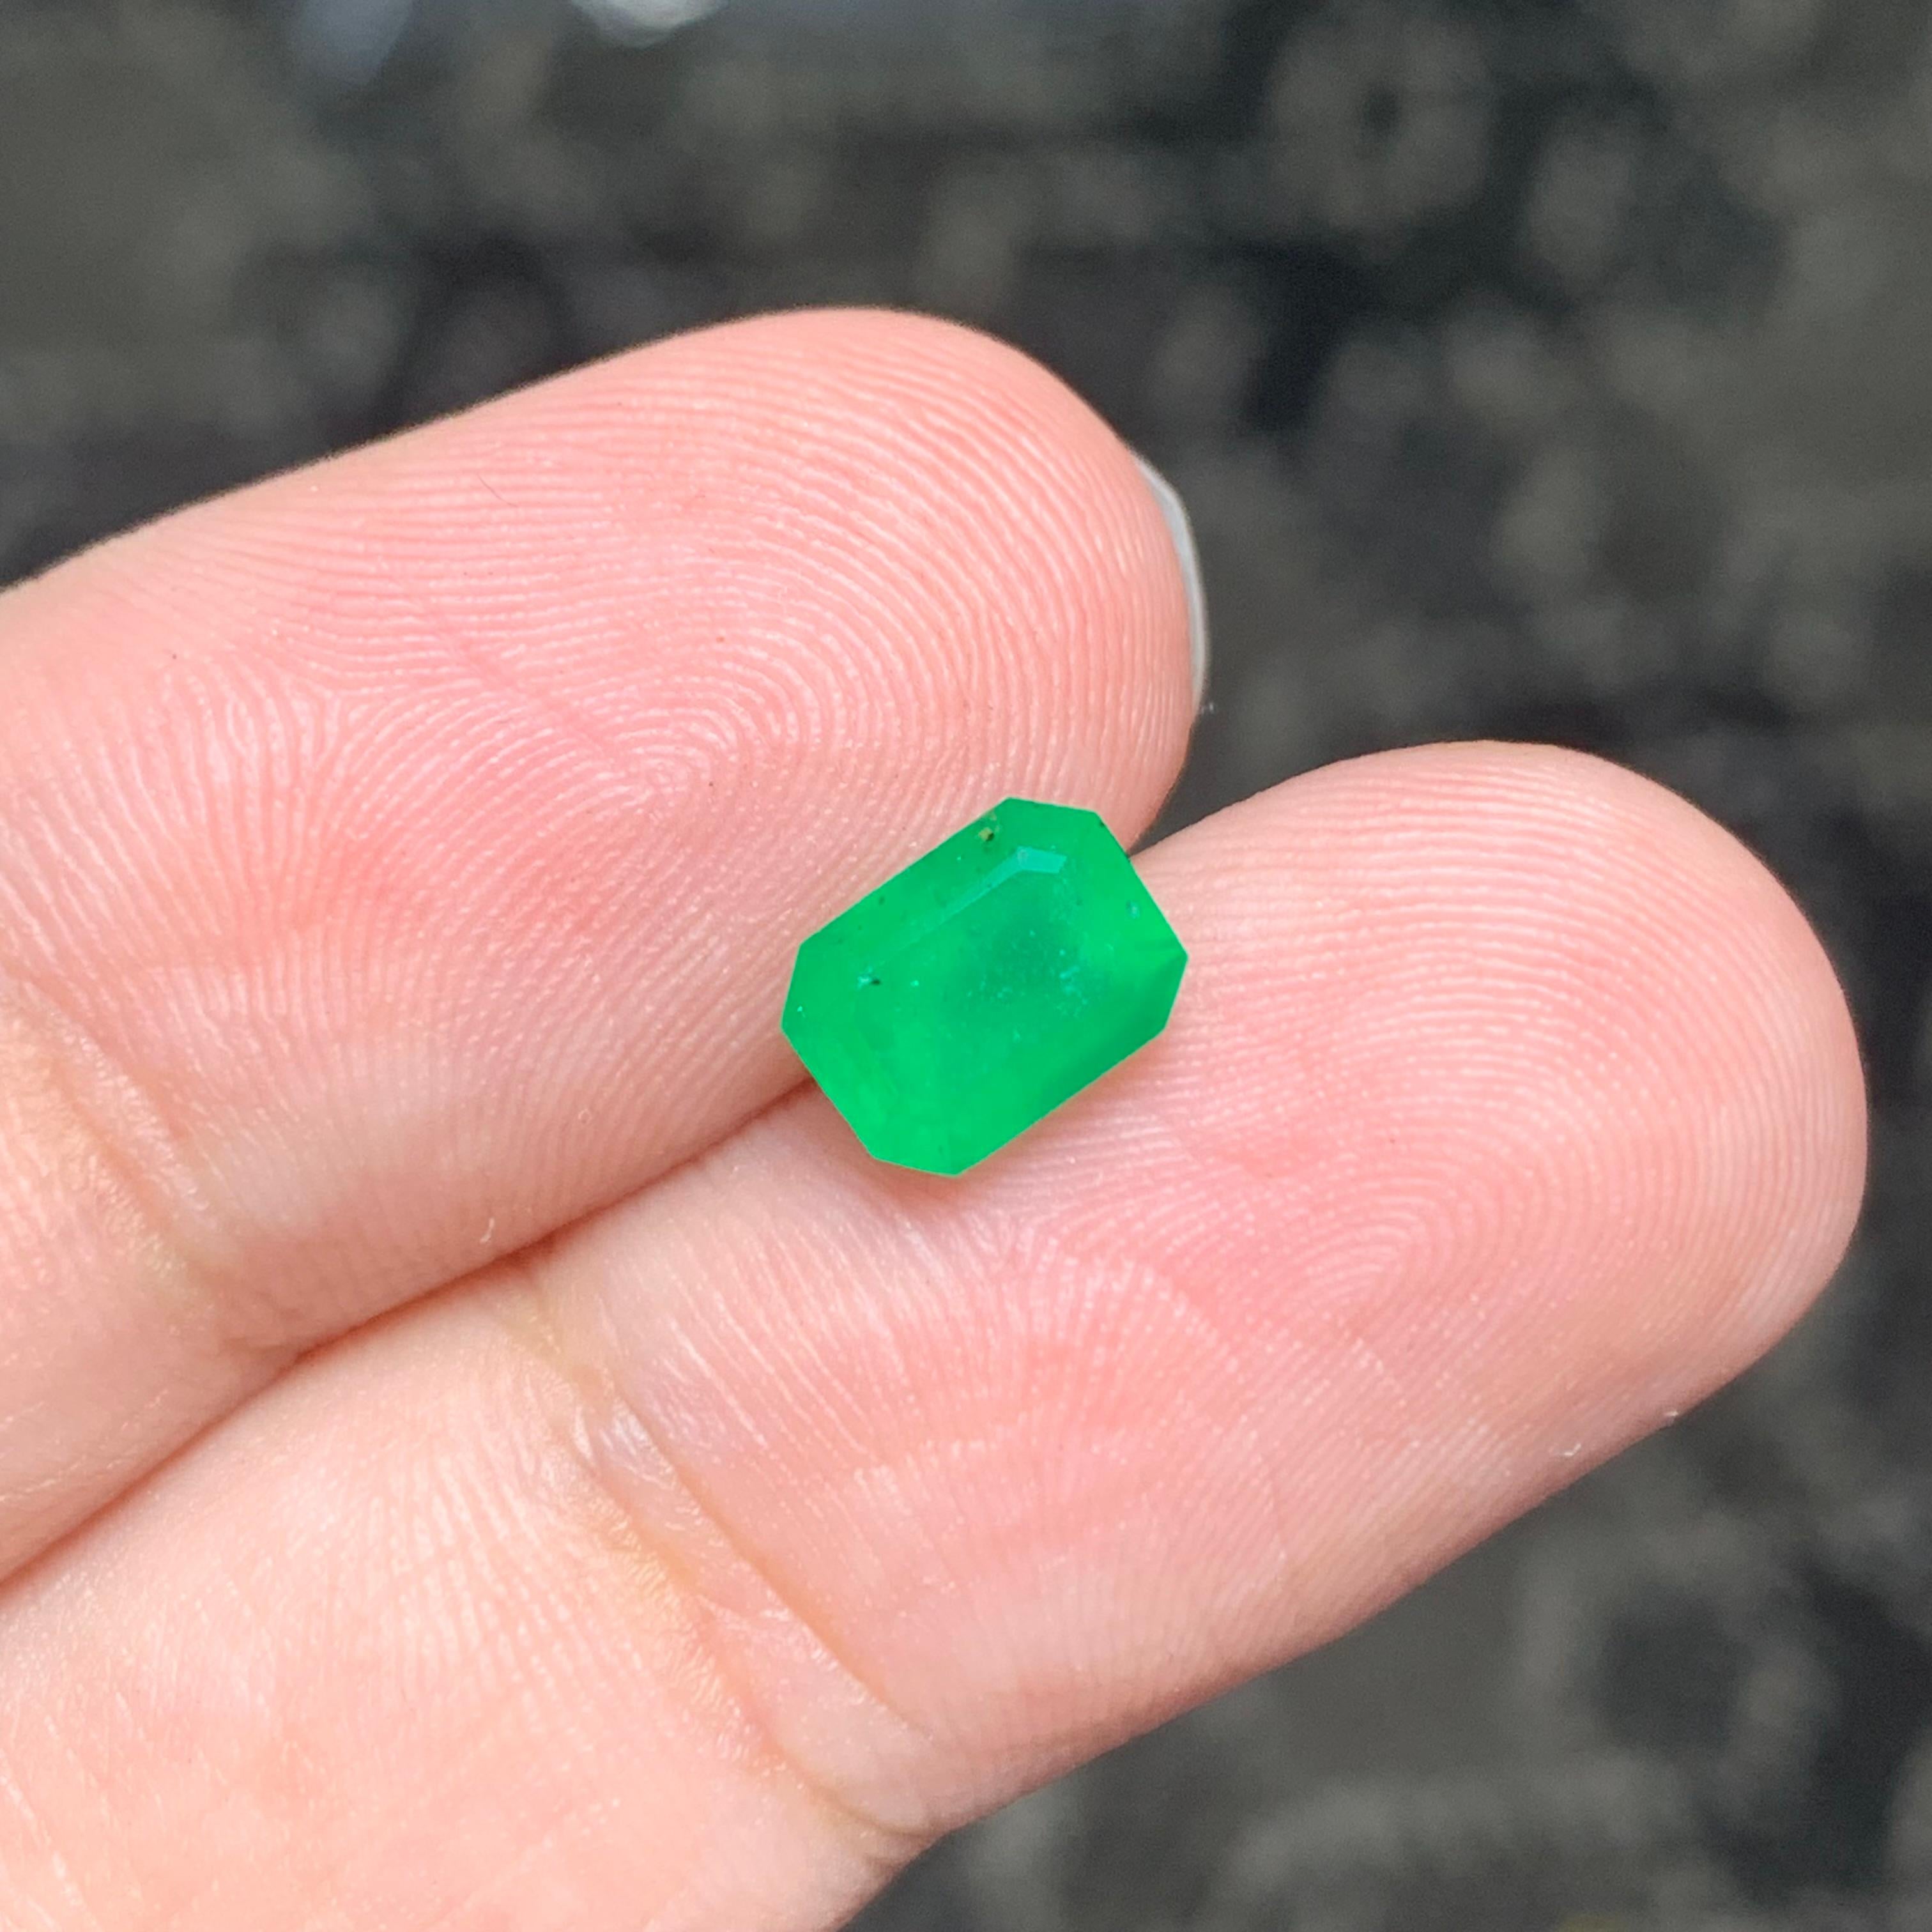 Arts and Crafts 1.45 Carat Natural Loose Emerald Gem From Swat, Pakistan  For Sale